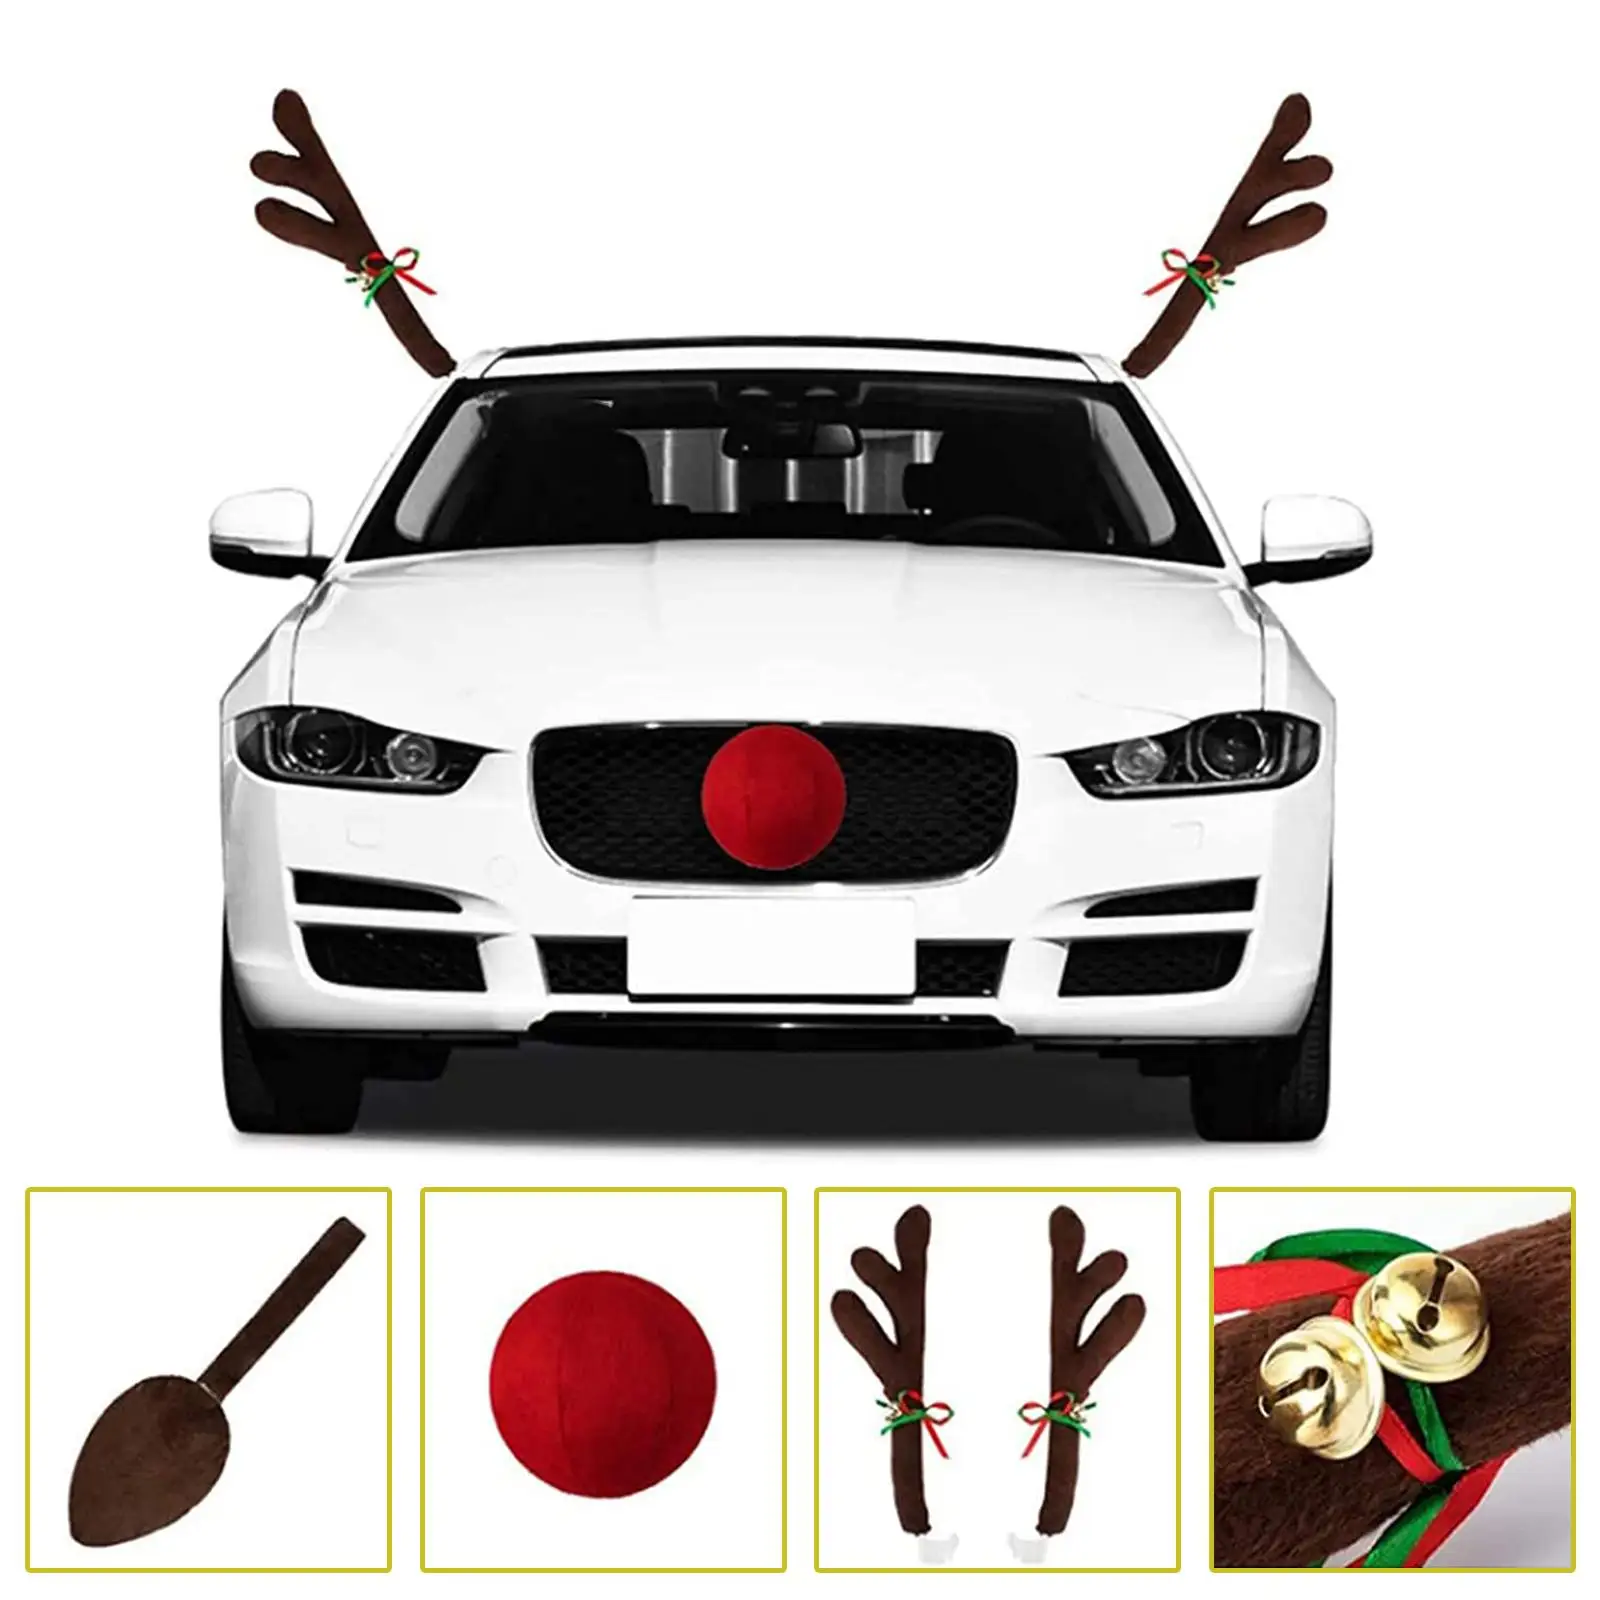 Car Reindeer Antlers & Nose Decorations Set Chrictmas Gift Party Accessory Car Costume Auto Accessories for car SUV